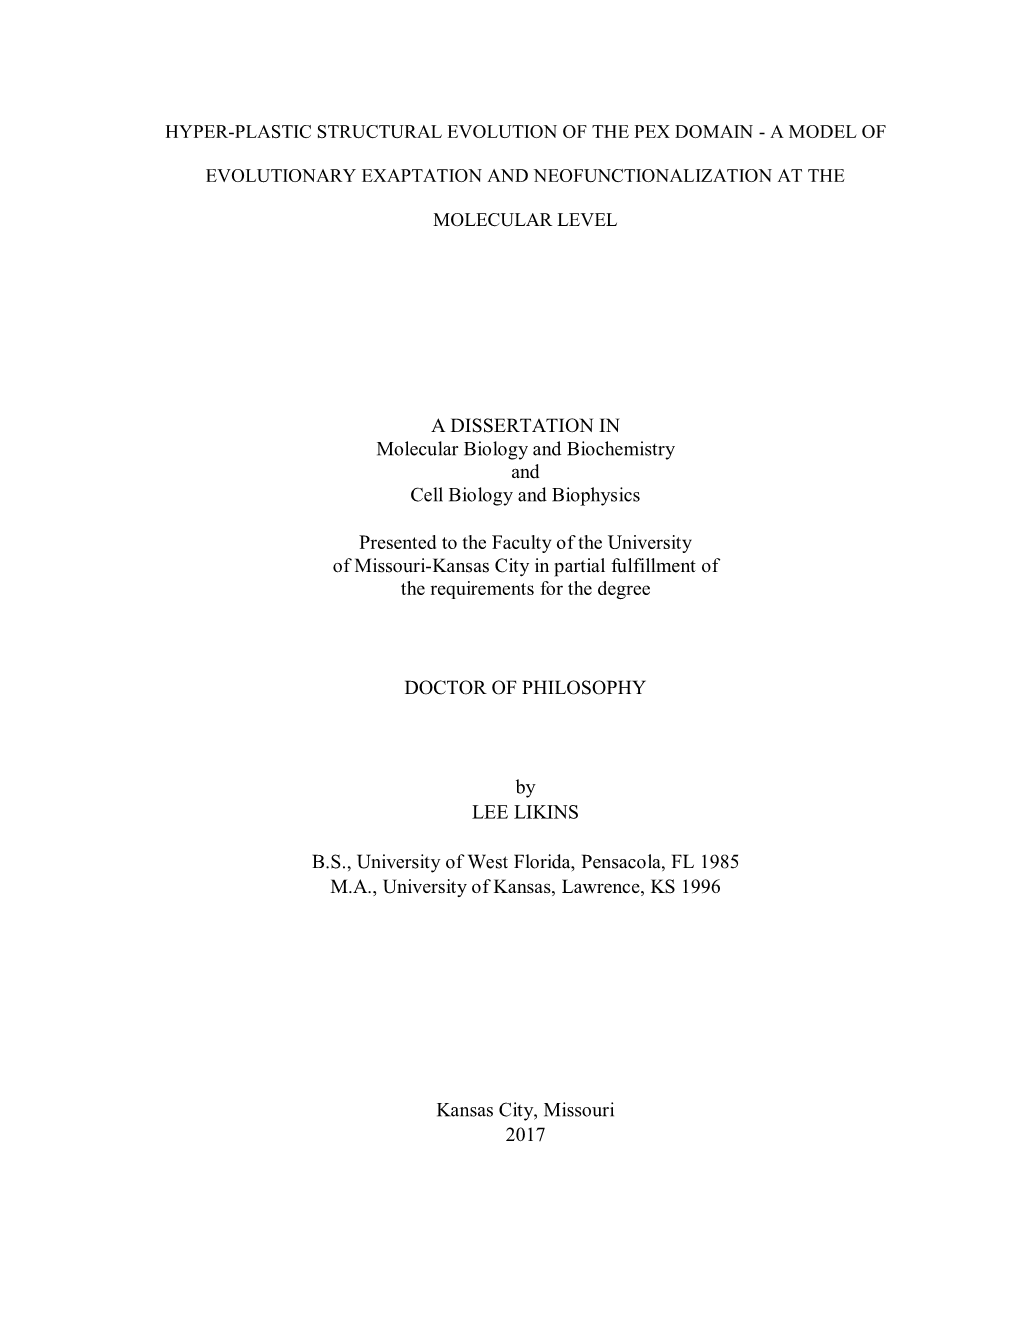 A DISSERTATION in Molecular Biology and Biochemistry and Cell Biology and Biophysics